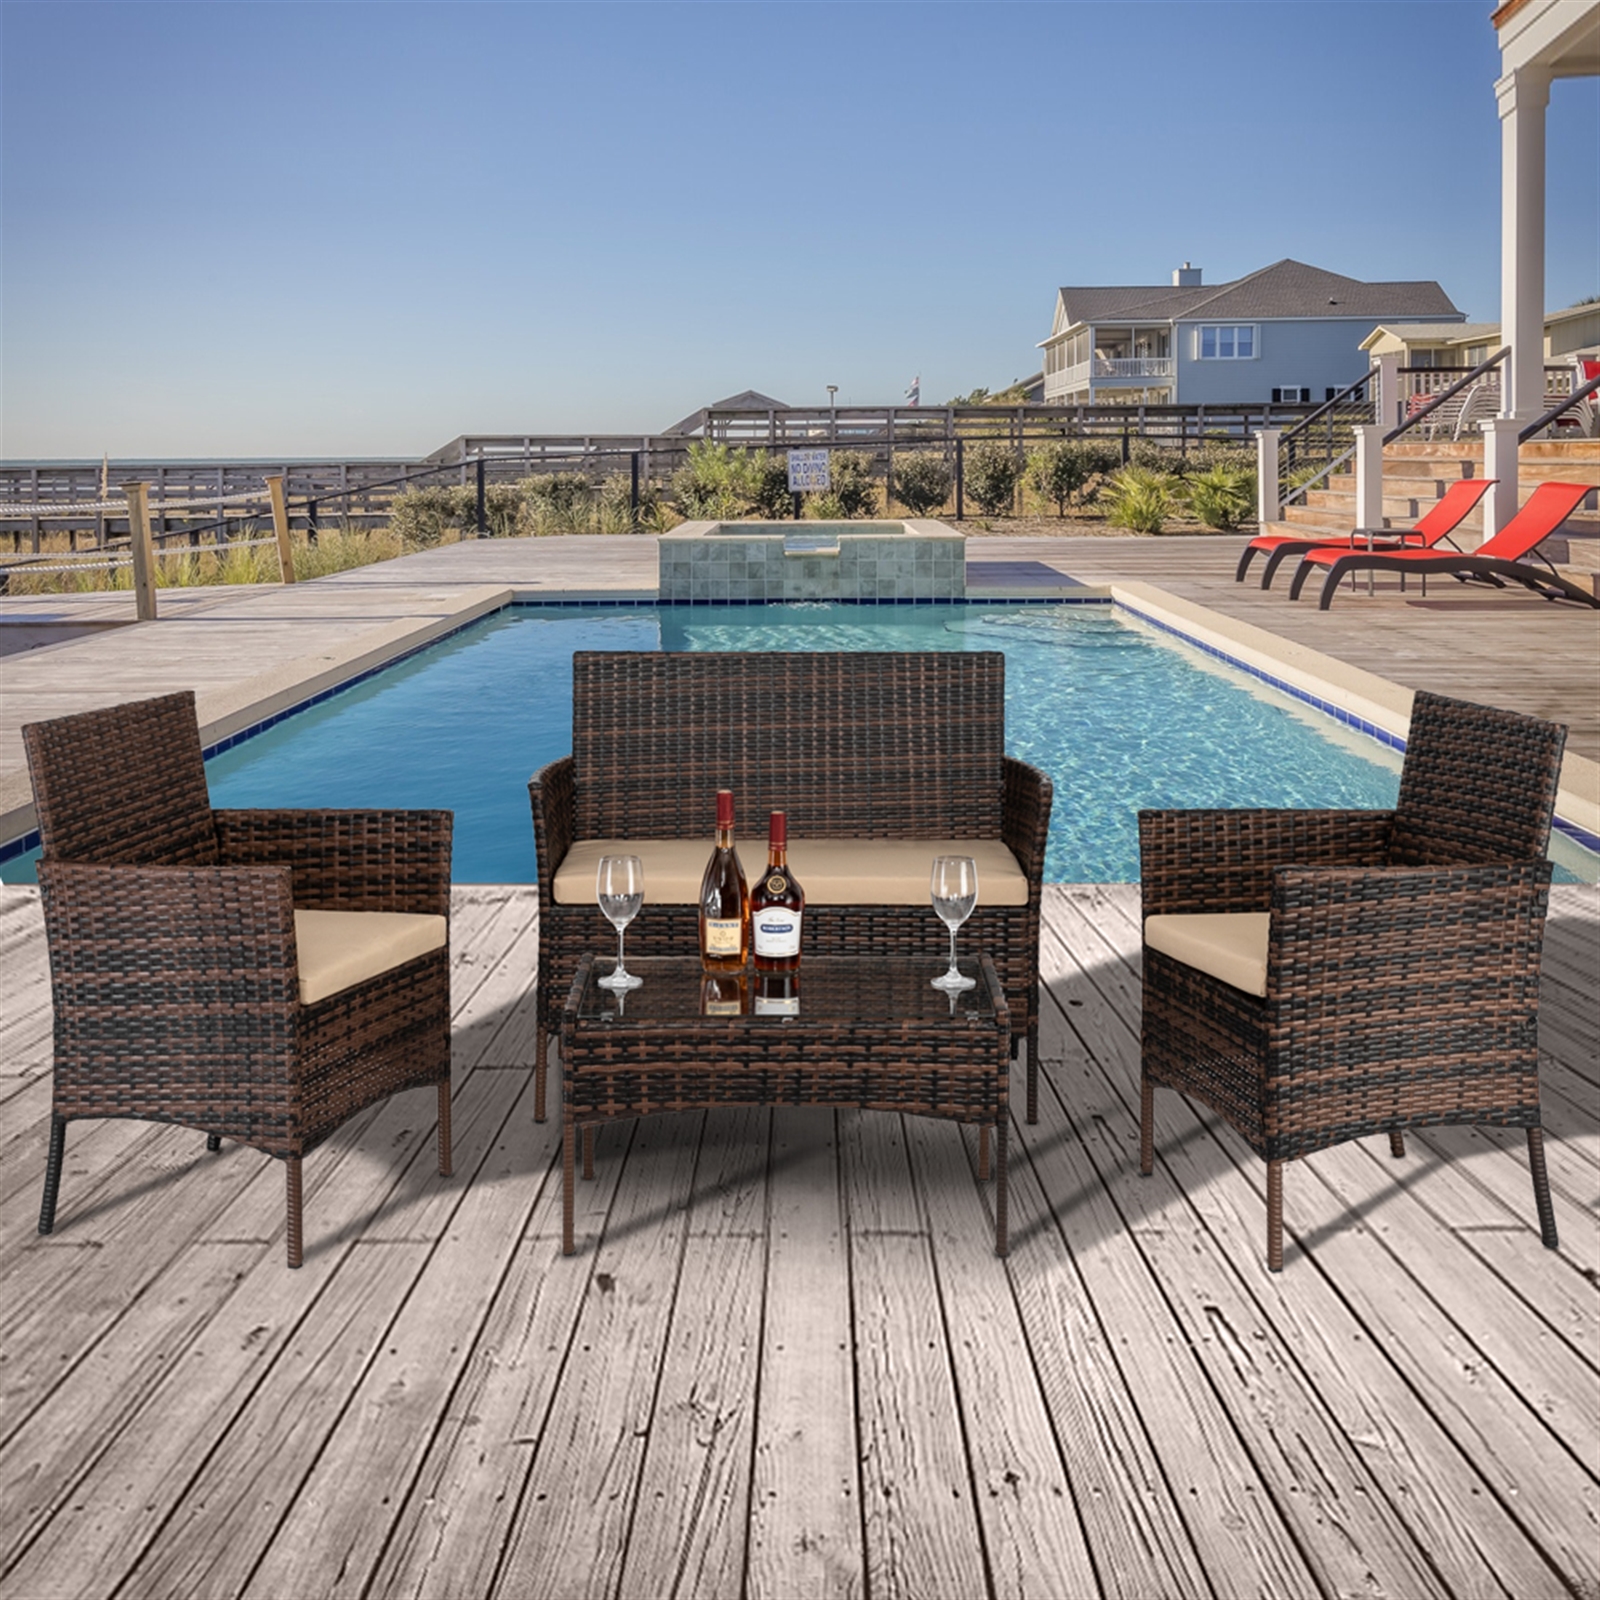 4 Piece Wicker Patio Conversation Furniture Set, Outdoor Rattan Chair and Table Set, Sectional Chair Set with Tea Table & Cushions, Bistro Set for Patio Backyard Porch Garden Poolside Balcony, B4512 - image 3 of 9